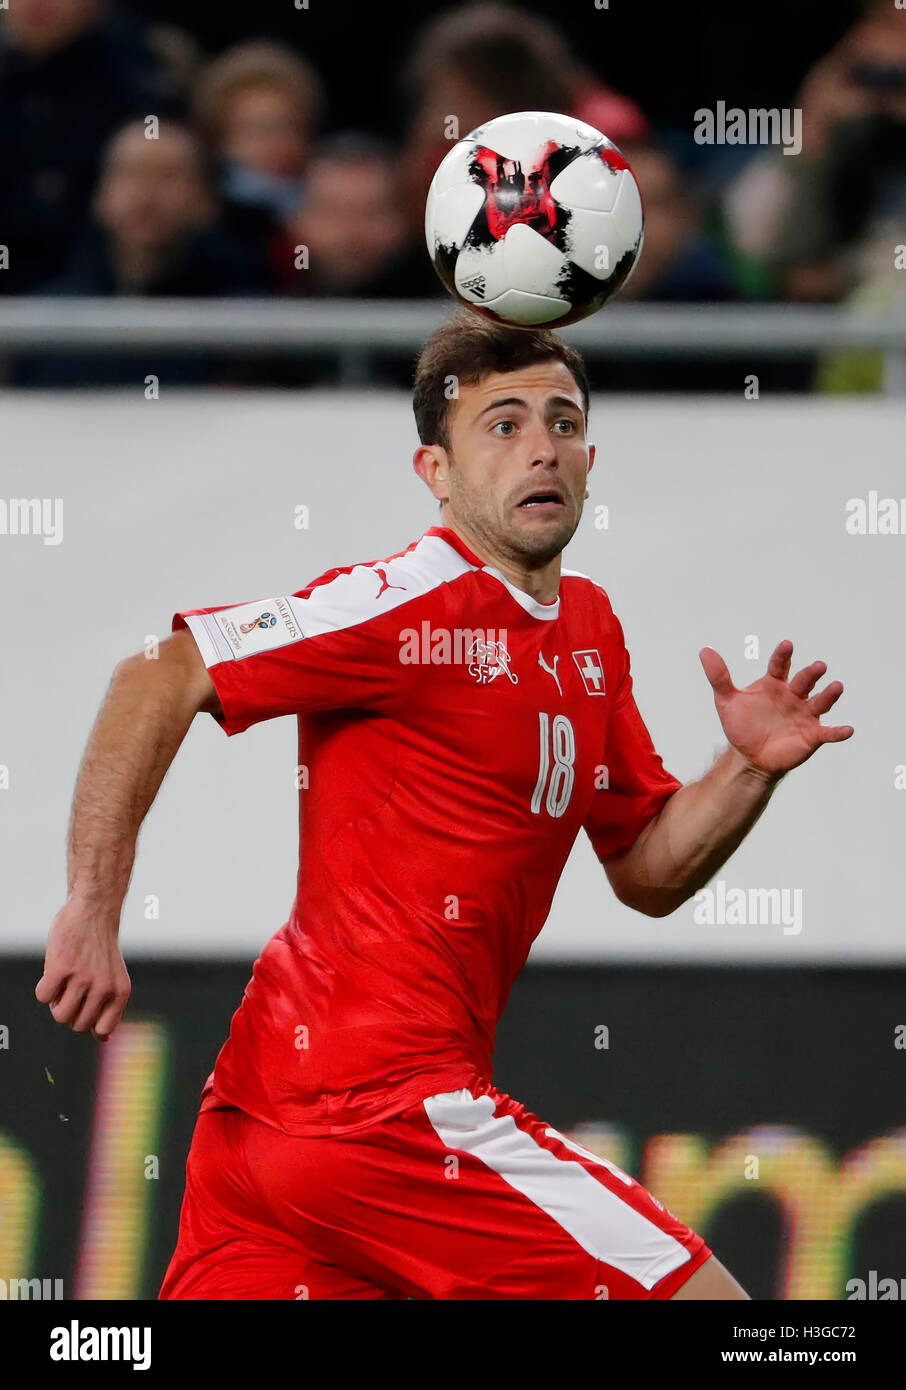 Budapest, Hungary. 07th Oct, 2016. BUDAPEST, HUNGARY - OCTOBER 7: Admir Mehmedi of Switzerland tries to control the ball during the FIFA 2018 World Cup Qualifier match between Hungary and Switzerland at Groupama Arena on October 7, 2016 in Budapest, Hungary. Credit:  Laszlo Szirtesi/Alamy Live News Stock Photo